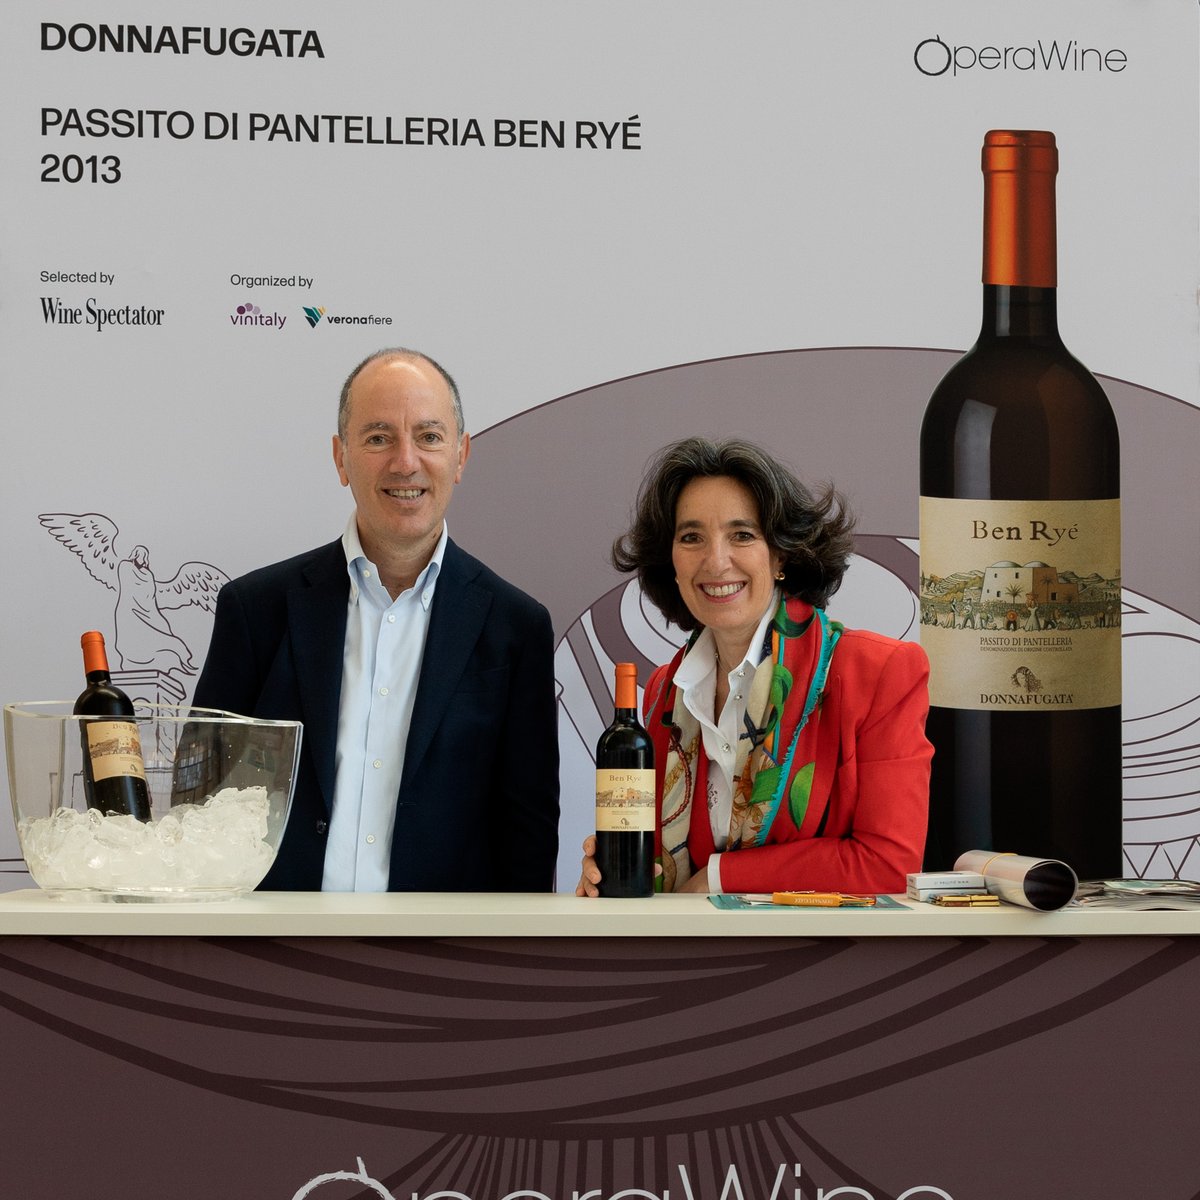 Here is the portrait of @DonnafugataWine, one of the great Italian producers selected by Wine Spectator for #OperaWine2024. During this year's Grand Tasting, they shared with guests their Passito di Pantelleria Ben Ryé 2013. Congratulations! #Vinitaly2024 #finestitalianwines